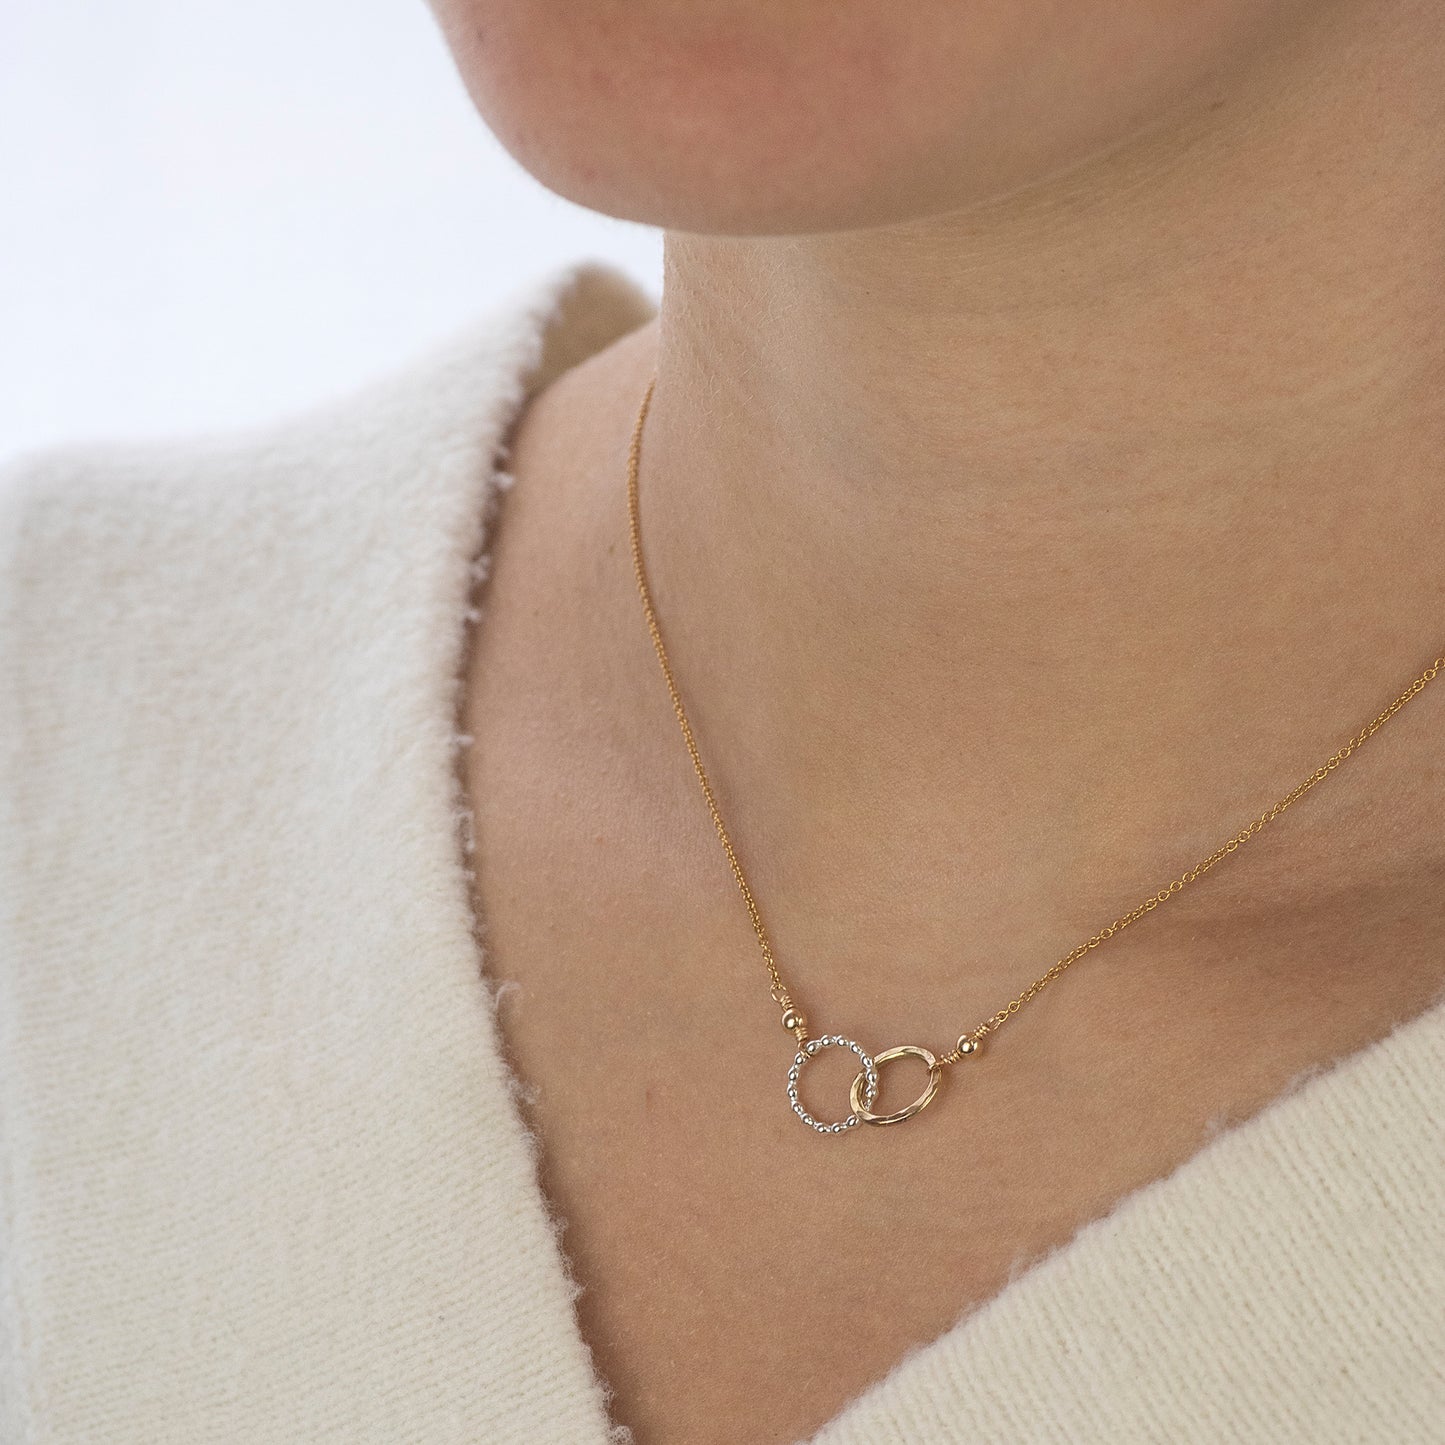 Friendship Gift - Love Link Necklace - Linked for a Lifetime - Silver & Gold